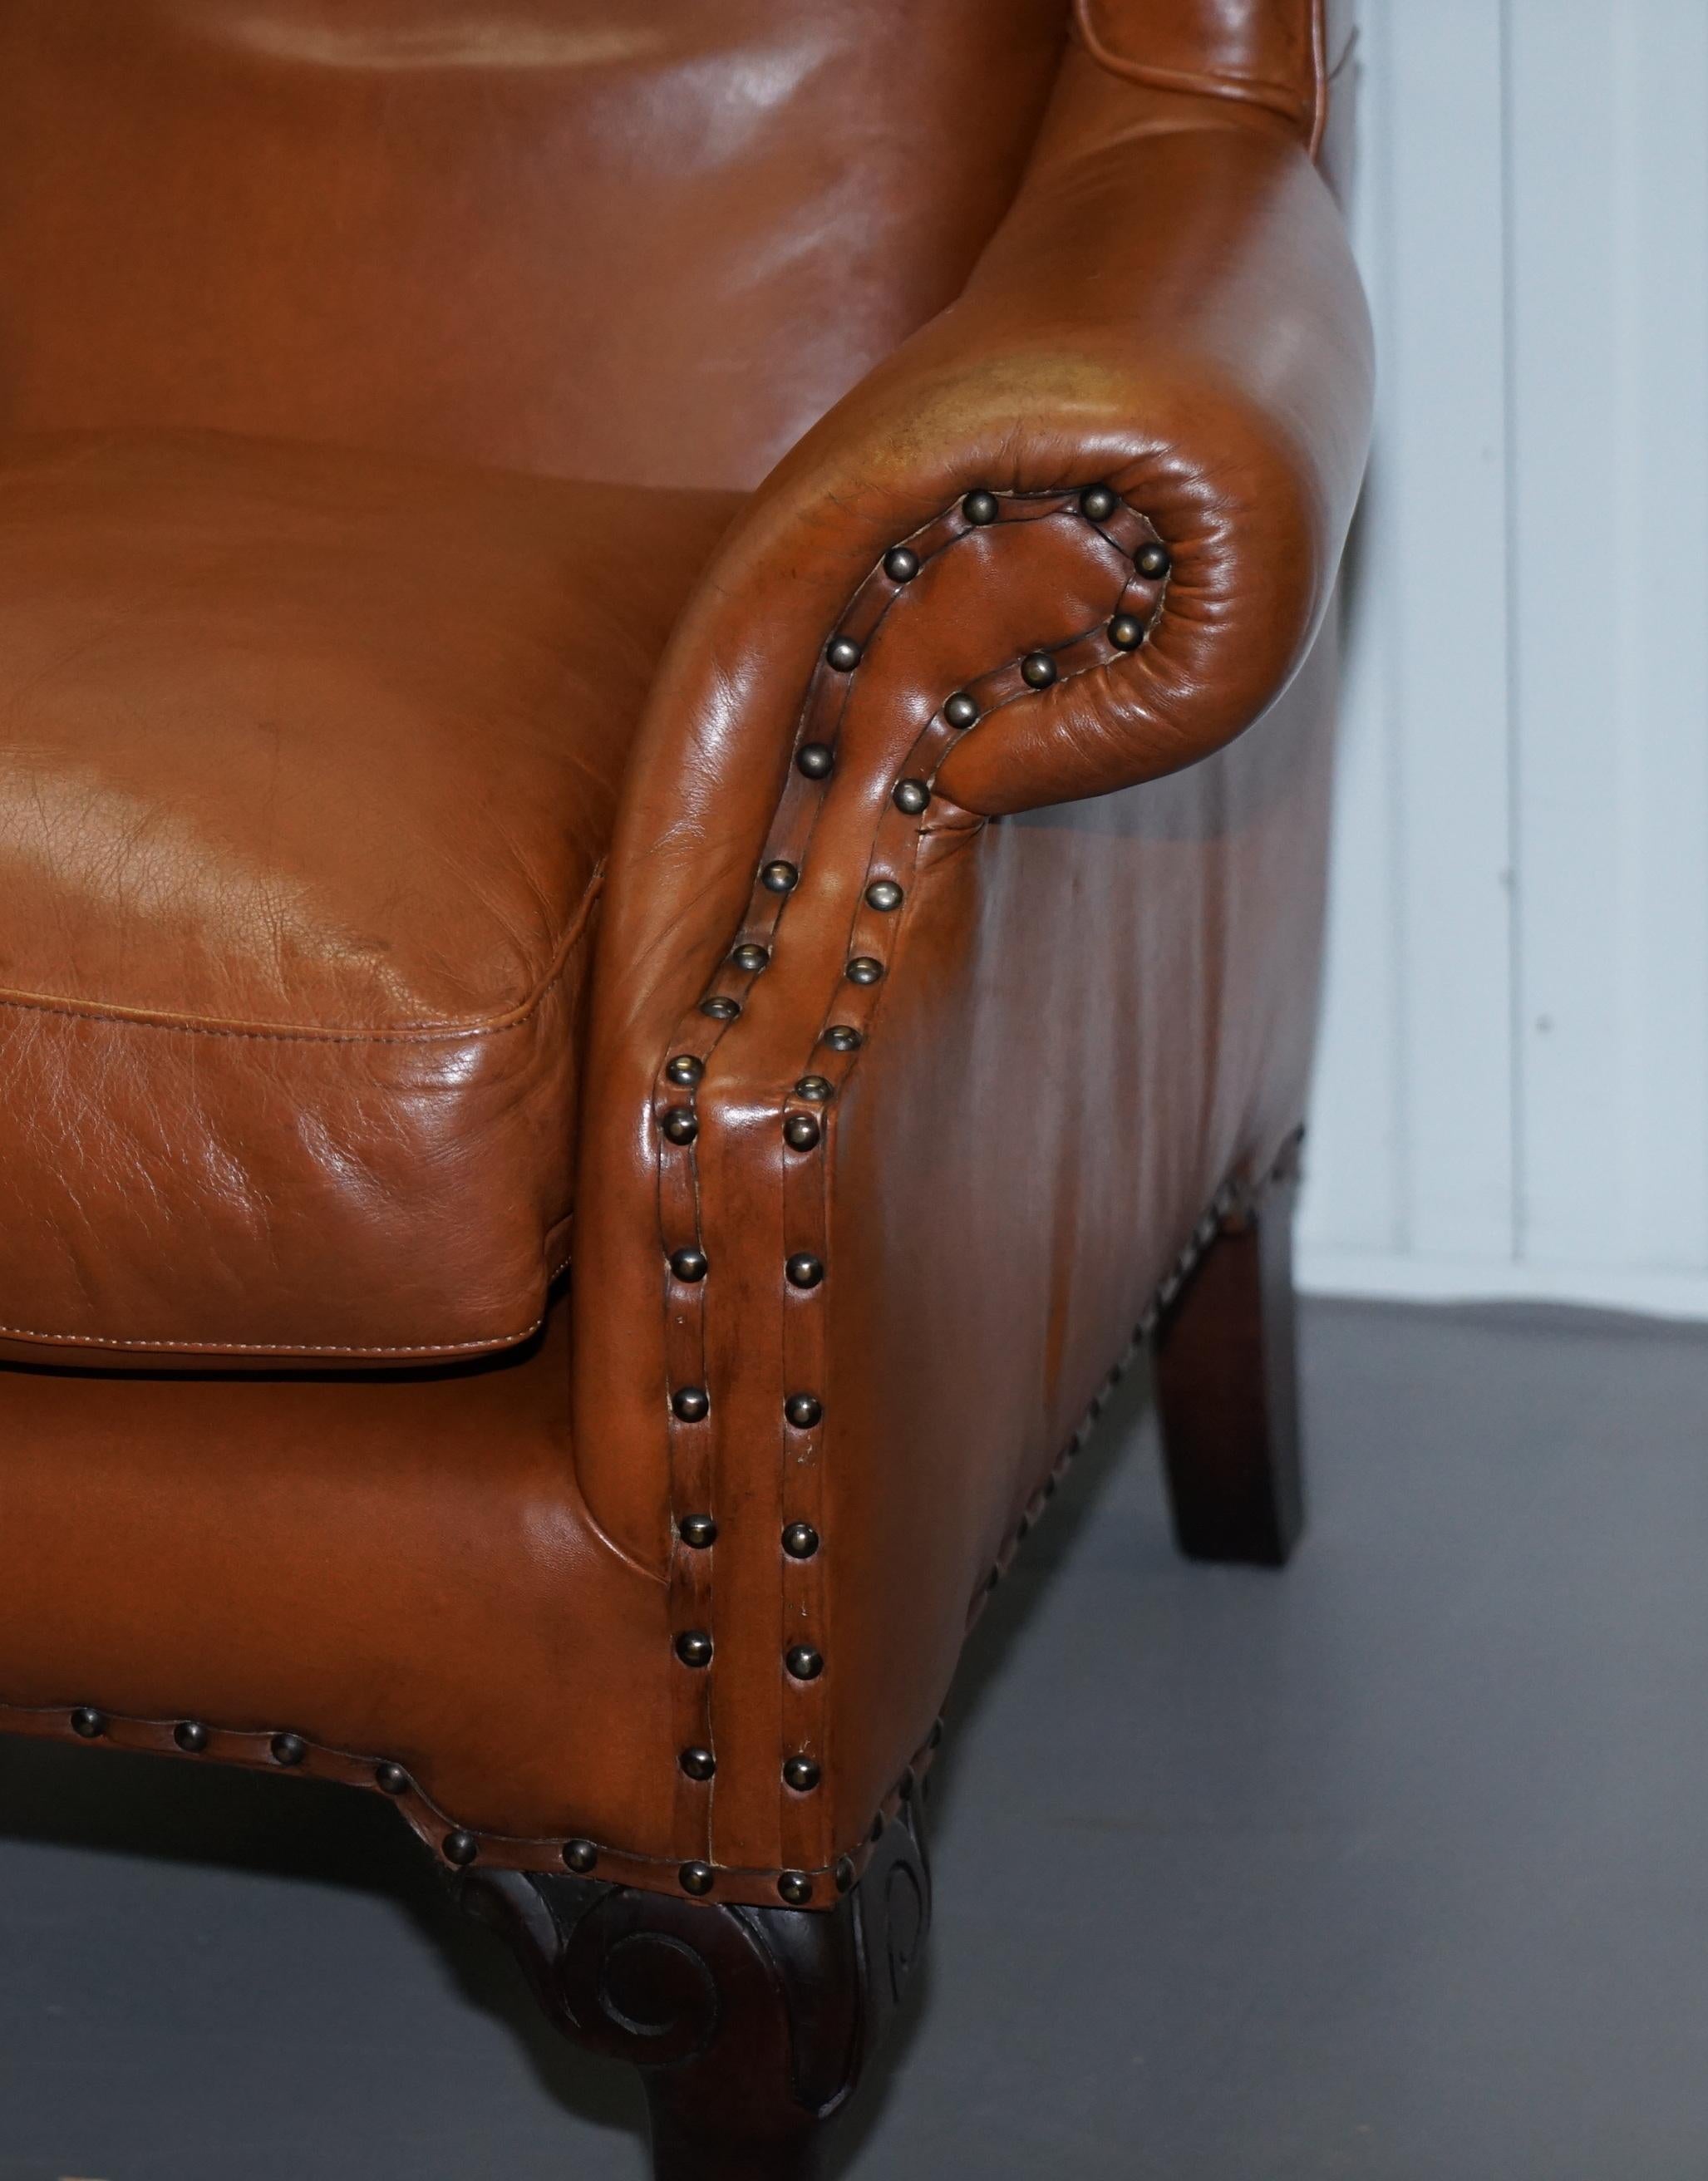 Tetrad Compton Brown Leather Claw and Ball Foot Armchair John Lewis 2